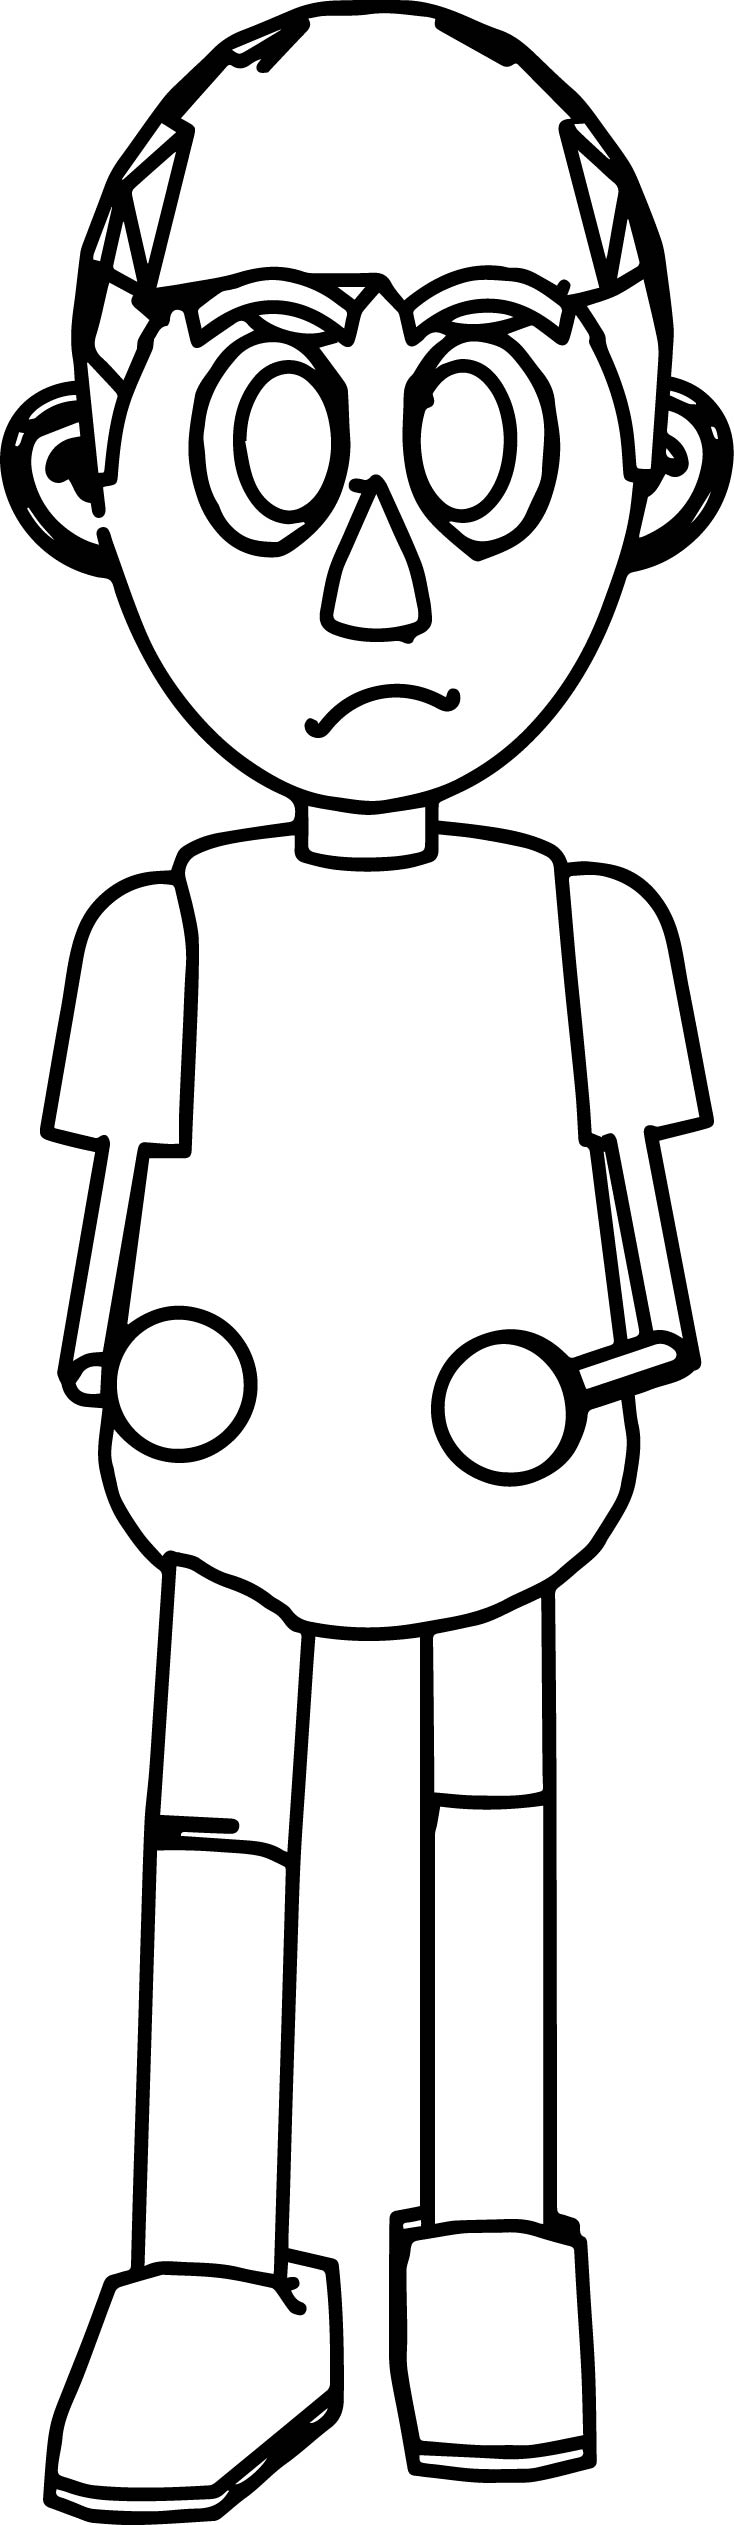 Jackson Child Coloring Page